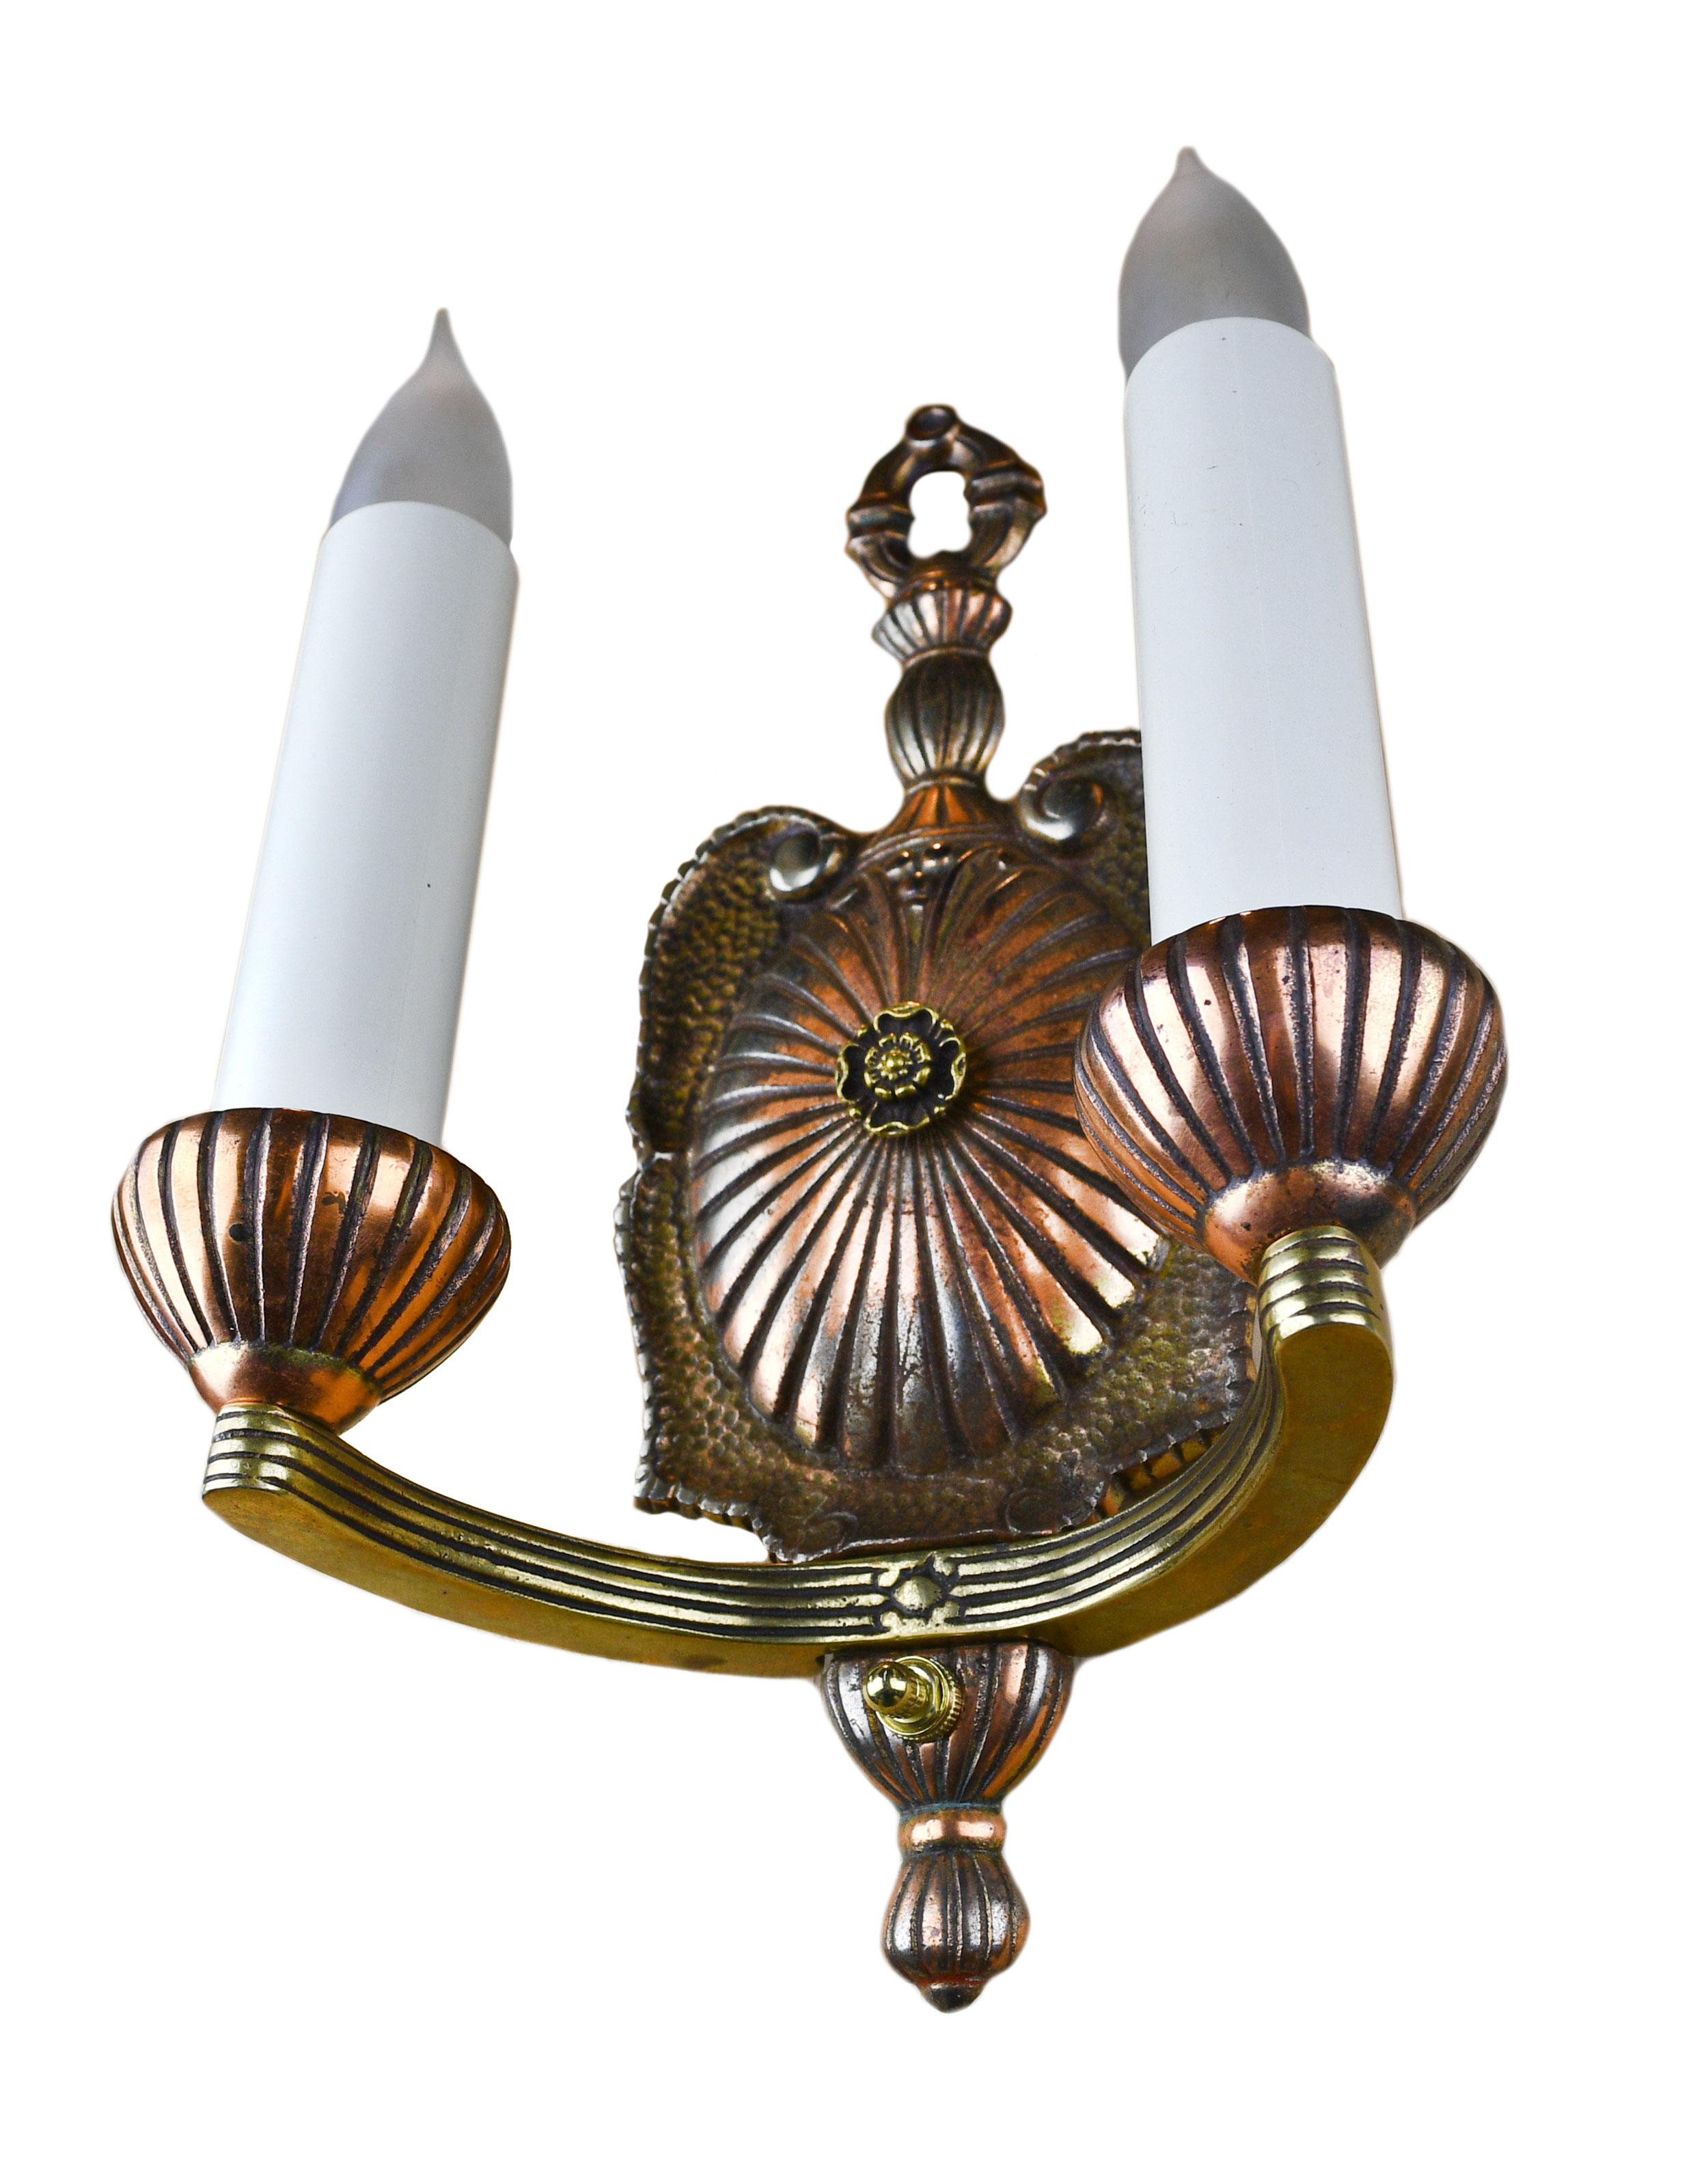 This sconce is made of lovely 2-tone brass and features a winding symmetrical design with a lovely flower button on the backplate,

circa 1920s
Condition: Good
Material: Brass
Finish: Original
Country of origin: USA
Illumination: 2 standard